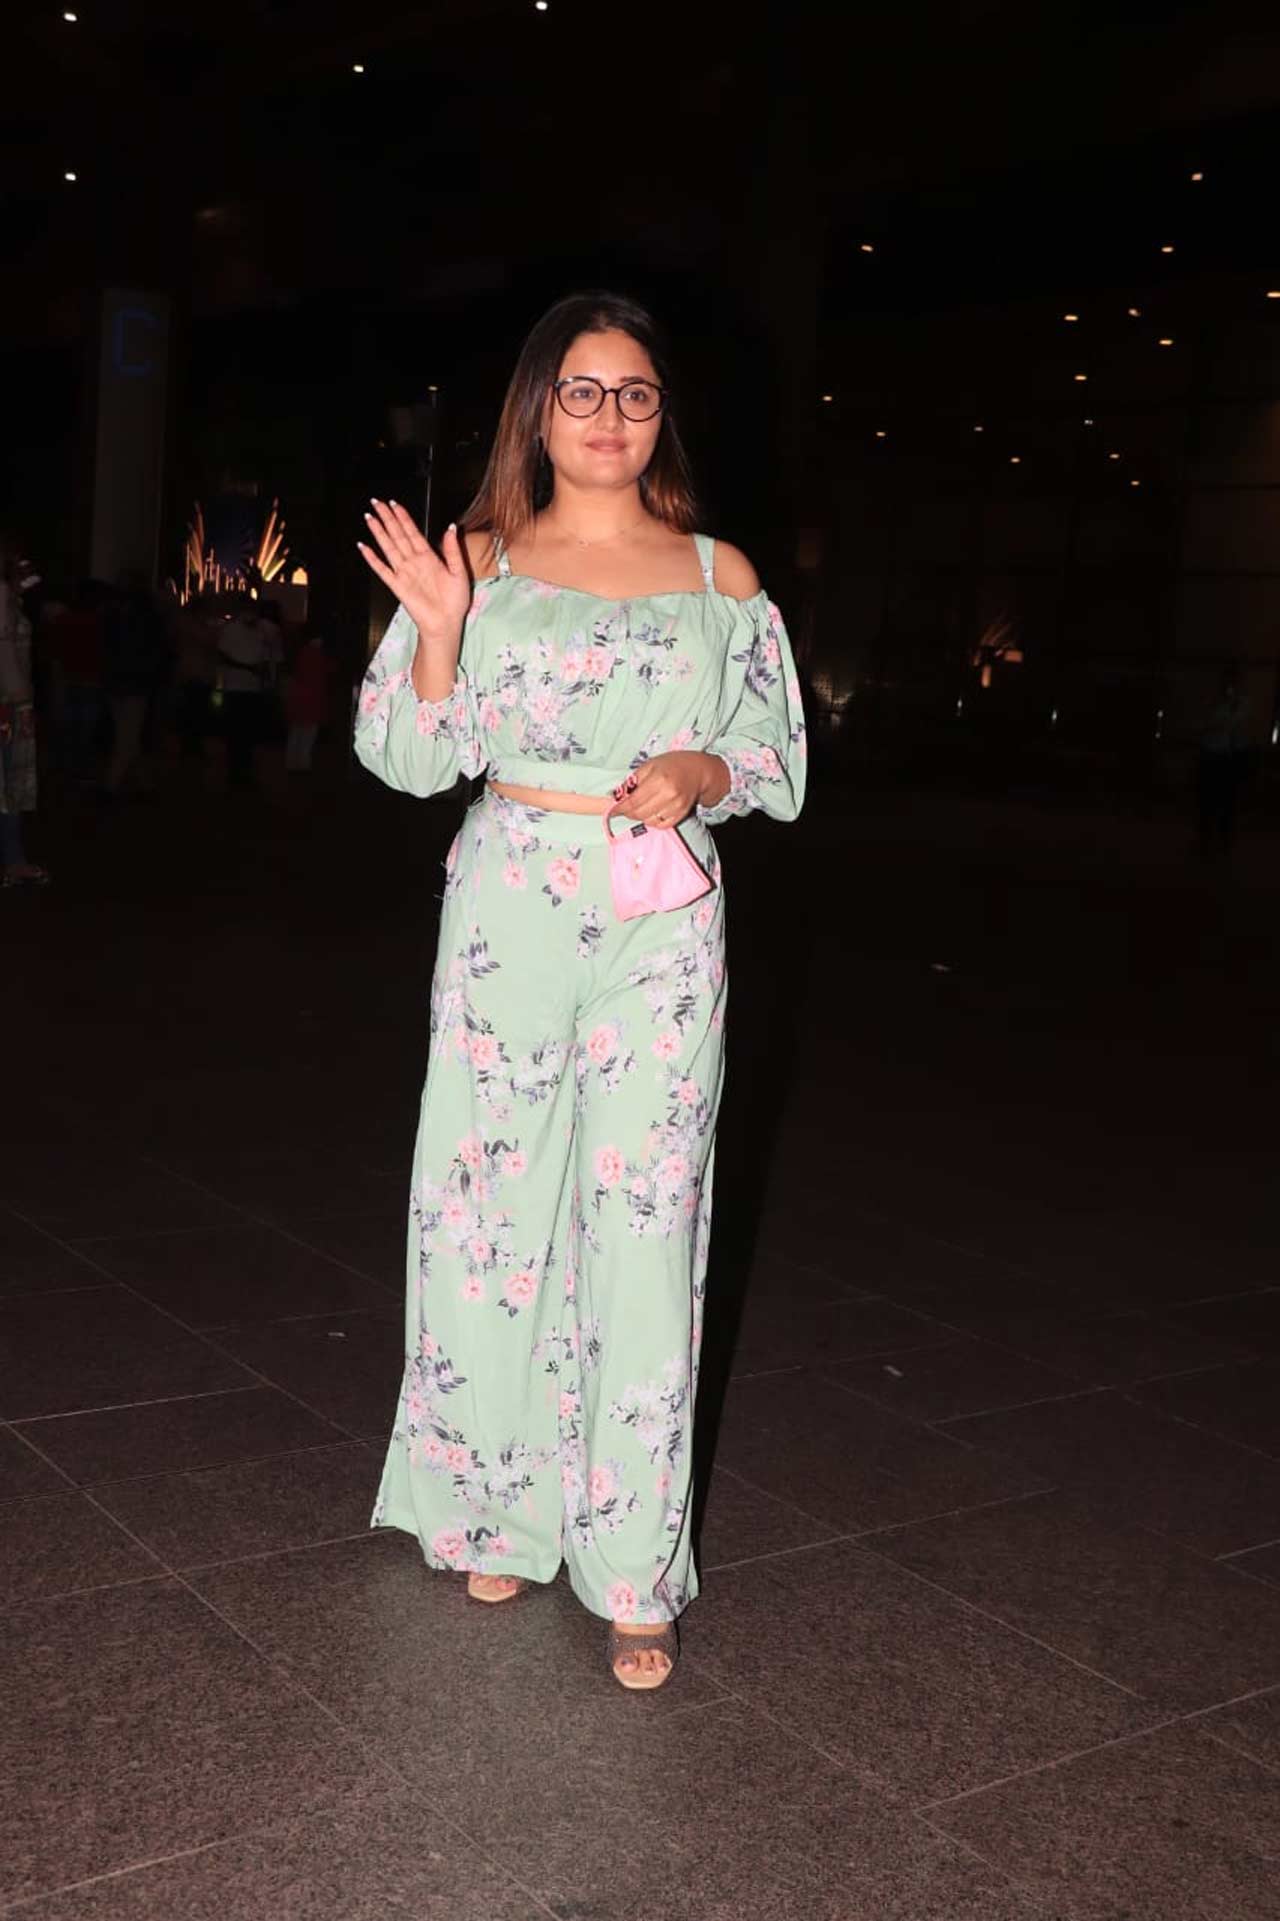 Rashami Desai was snapped by the shutterbugs at the Mumbai airport. Rashami, on the work front, made her digital debut with Tandoor, a thriller web show which released on July 23, 2021. The digital outing also had Tanuj Virwani playing a pivotal role among others.